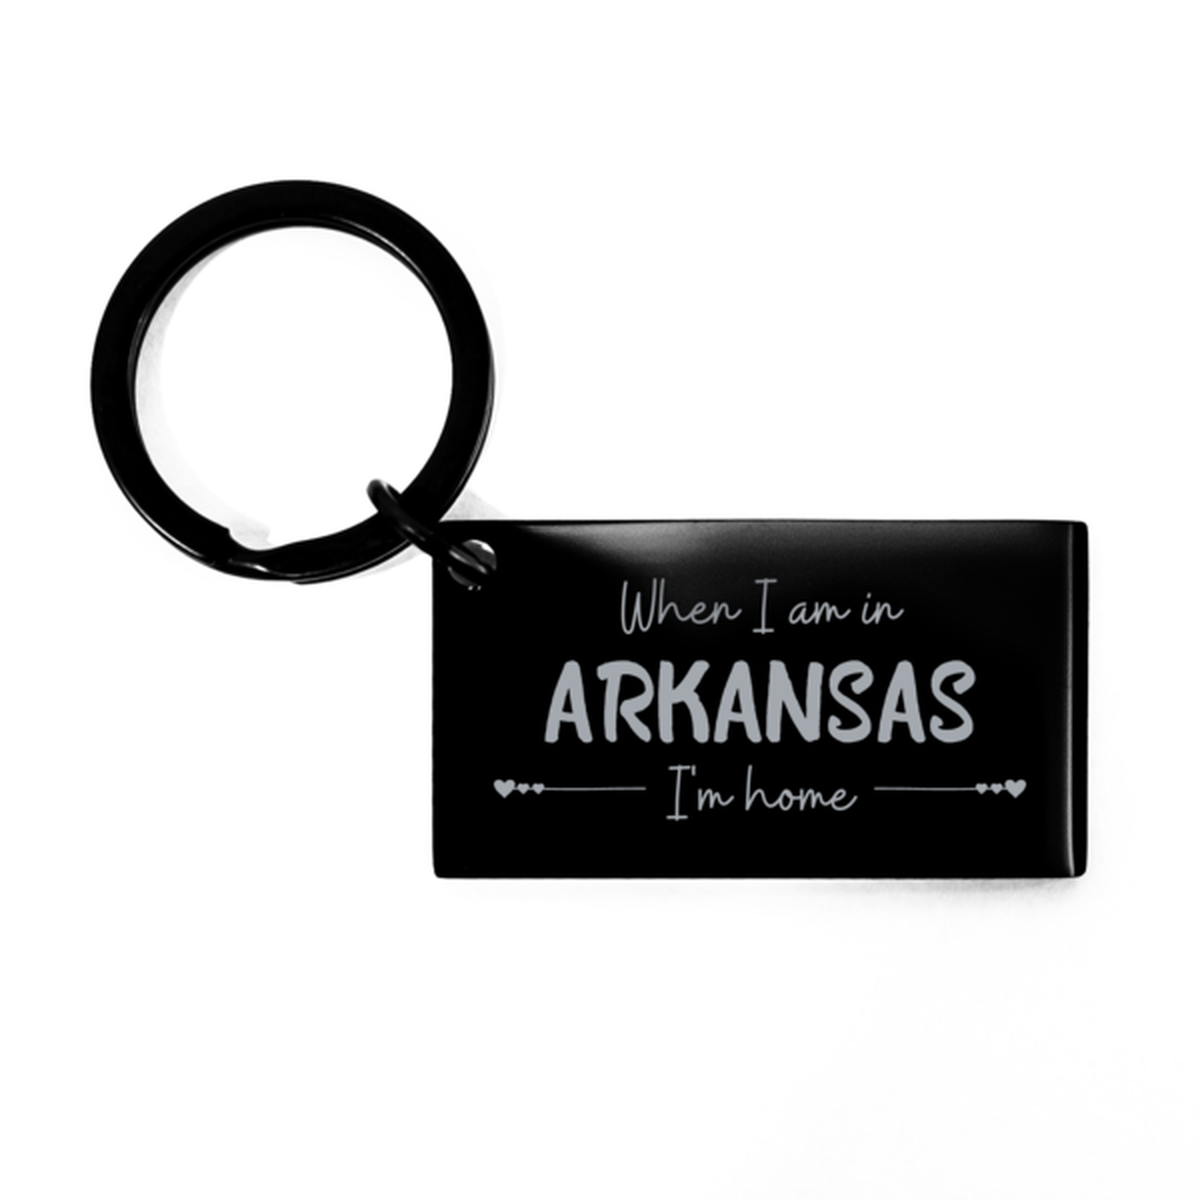 When I am in Arkansas I'm home Keychain, Cheap Gifts For Arkansas, State Arkansas Birthday Gifts for Friends Coworker